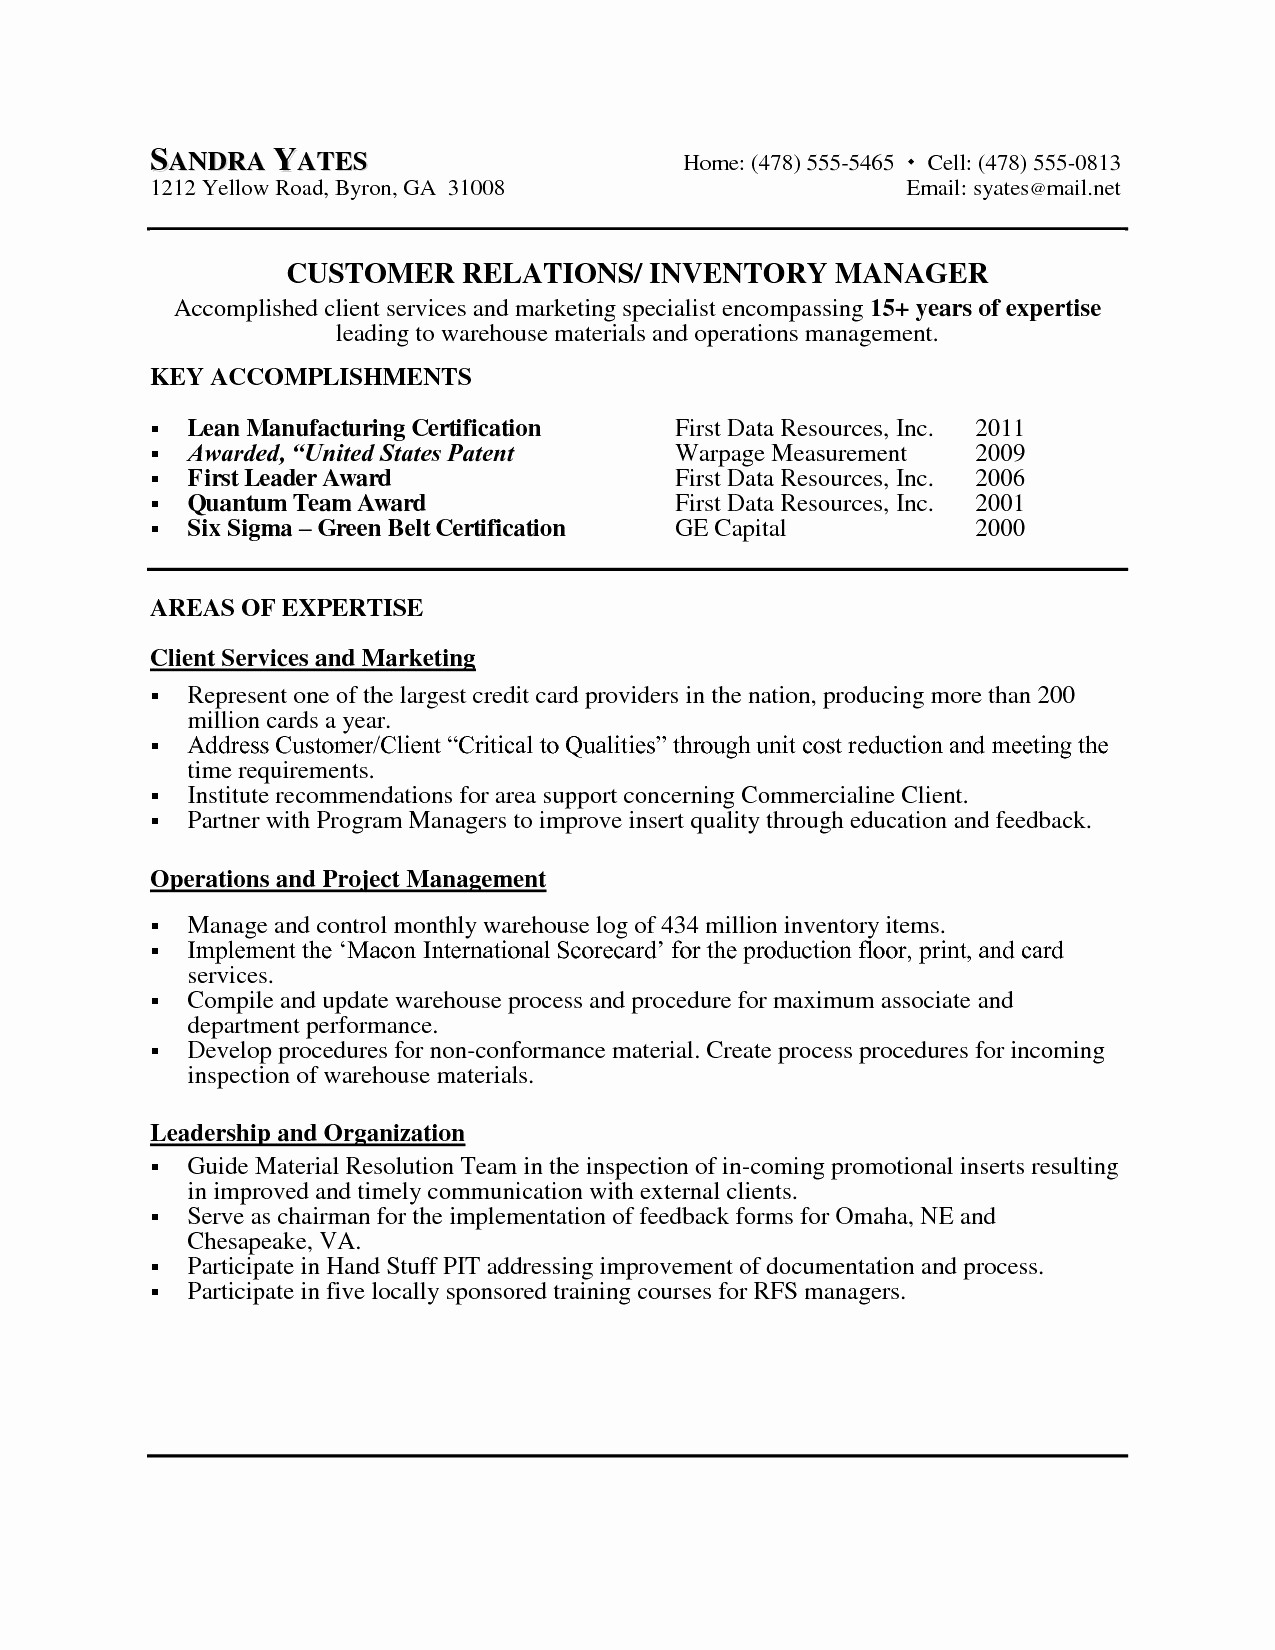 Cv Letter Template - Cover Letter Examples for Resumes Luxury 20 Resume with Cover Letter